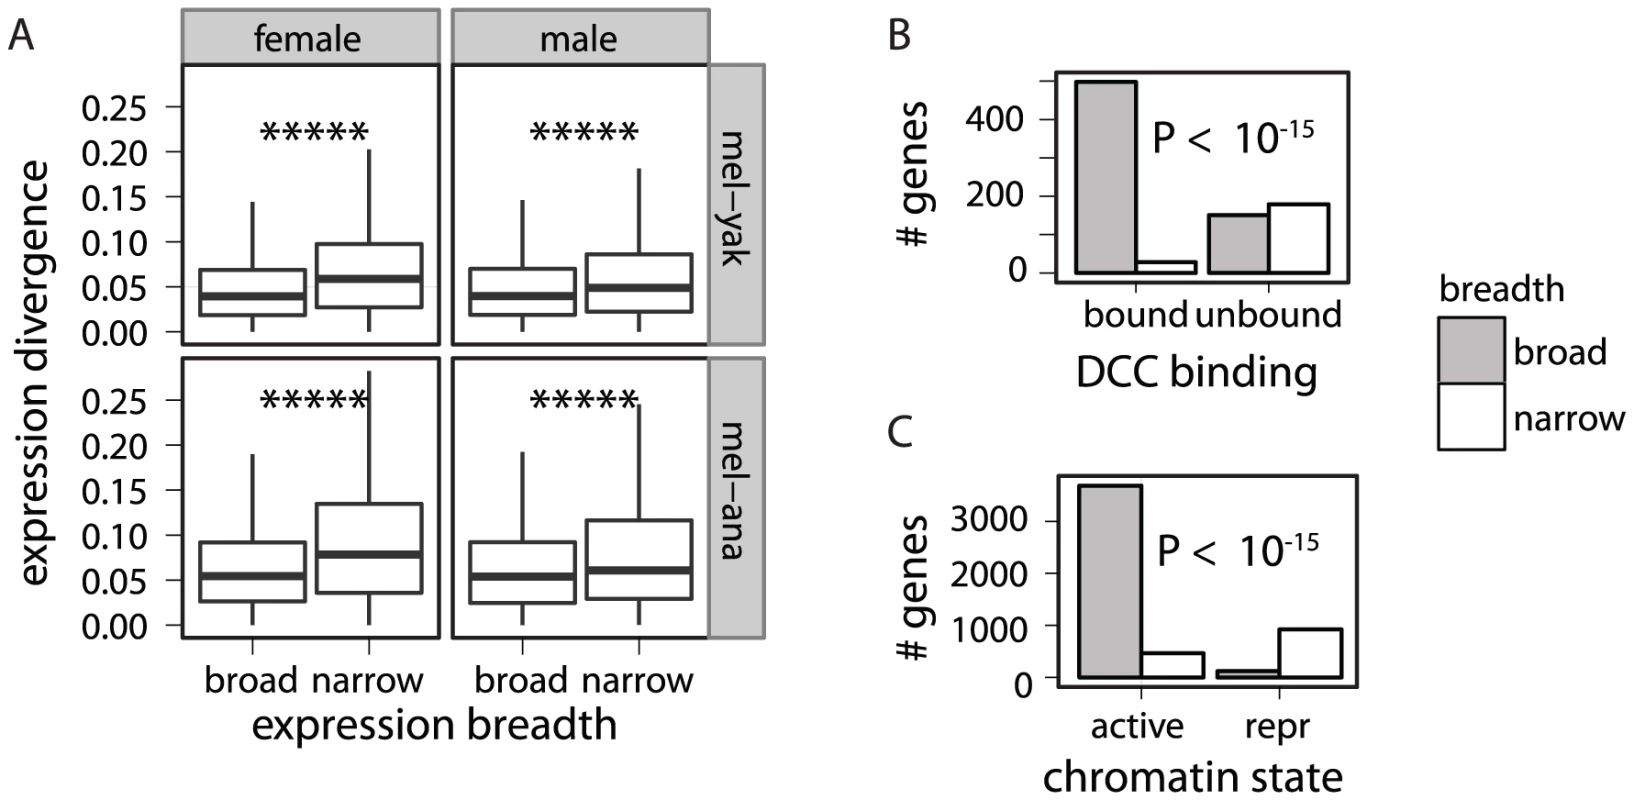 Association between expression breadth, DCC binding, chromatin state, and expression divergence.